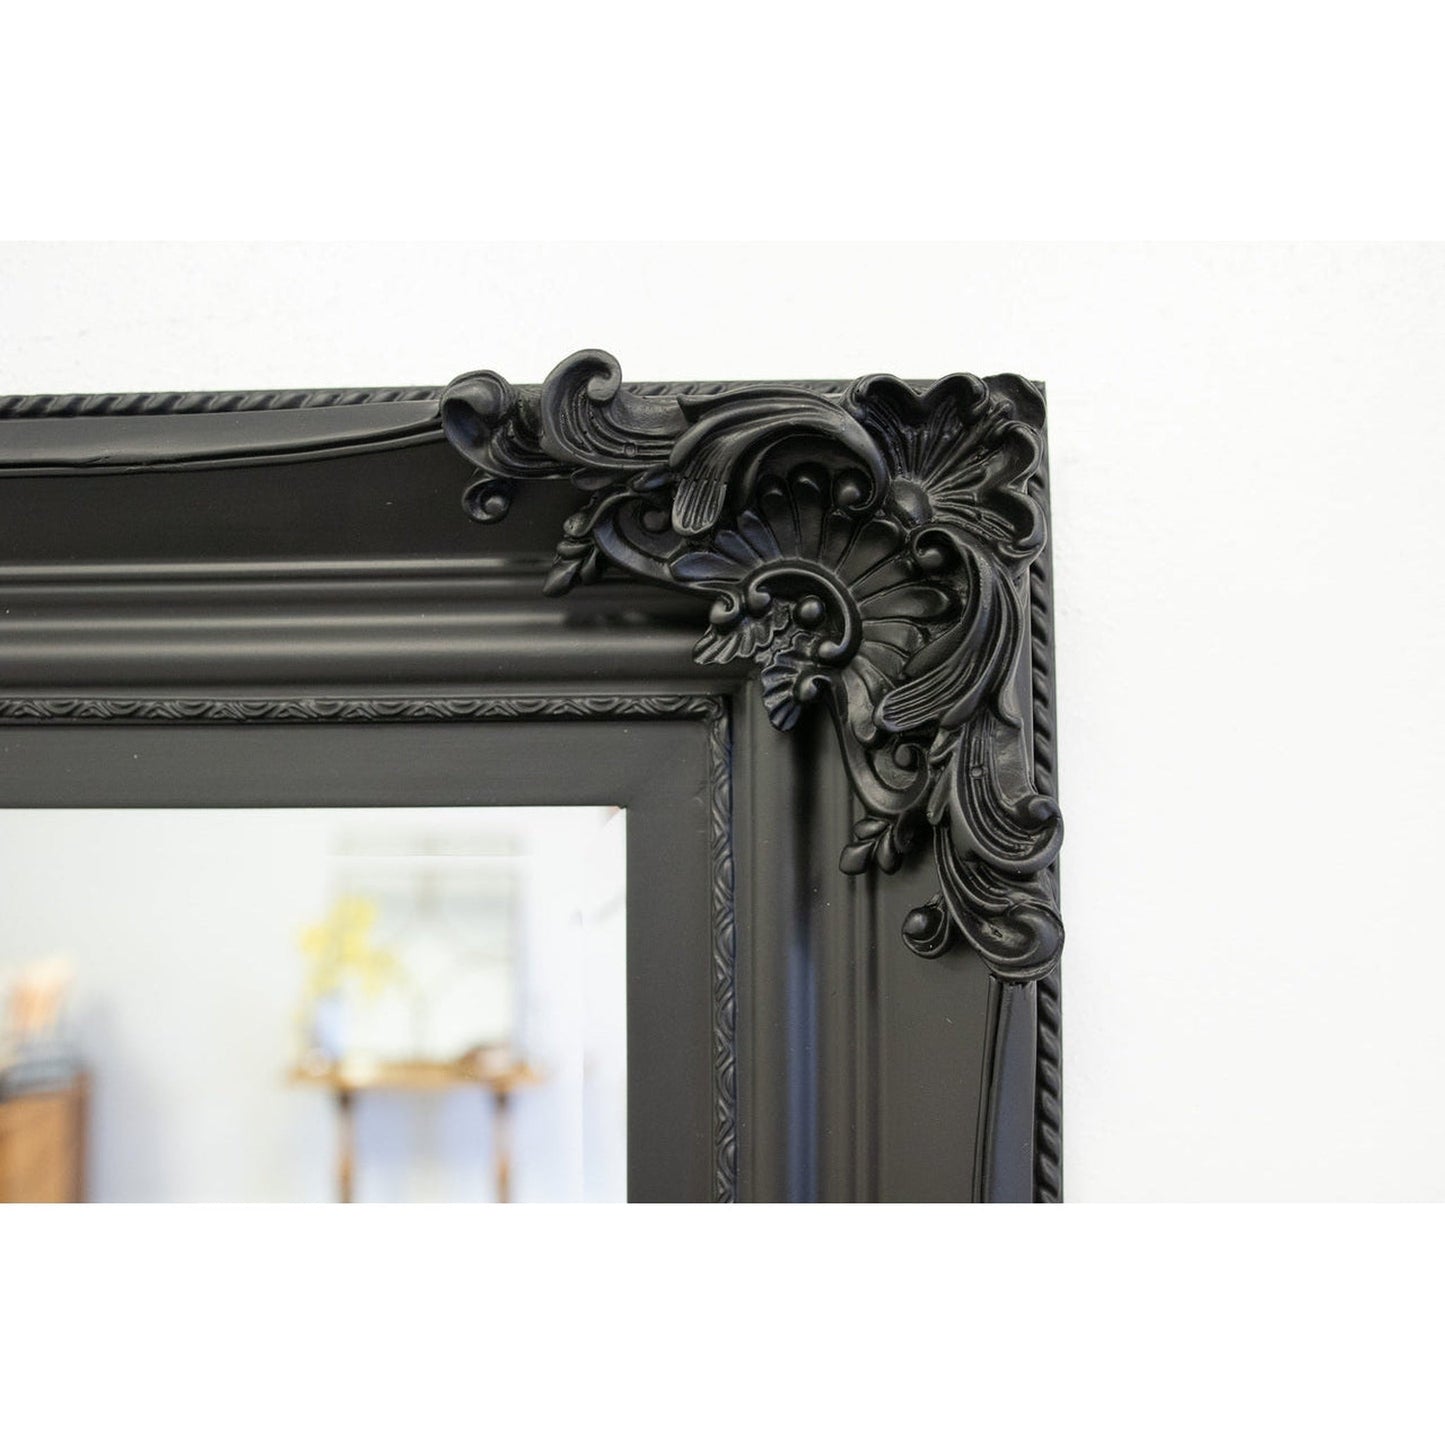 SBC Decor Beaumont 32" x 44" Wall-Mounted Wood Frame Vanity Wall Mirror In Matte Black Finish